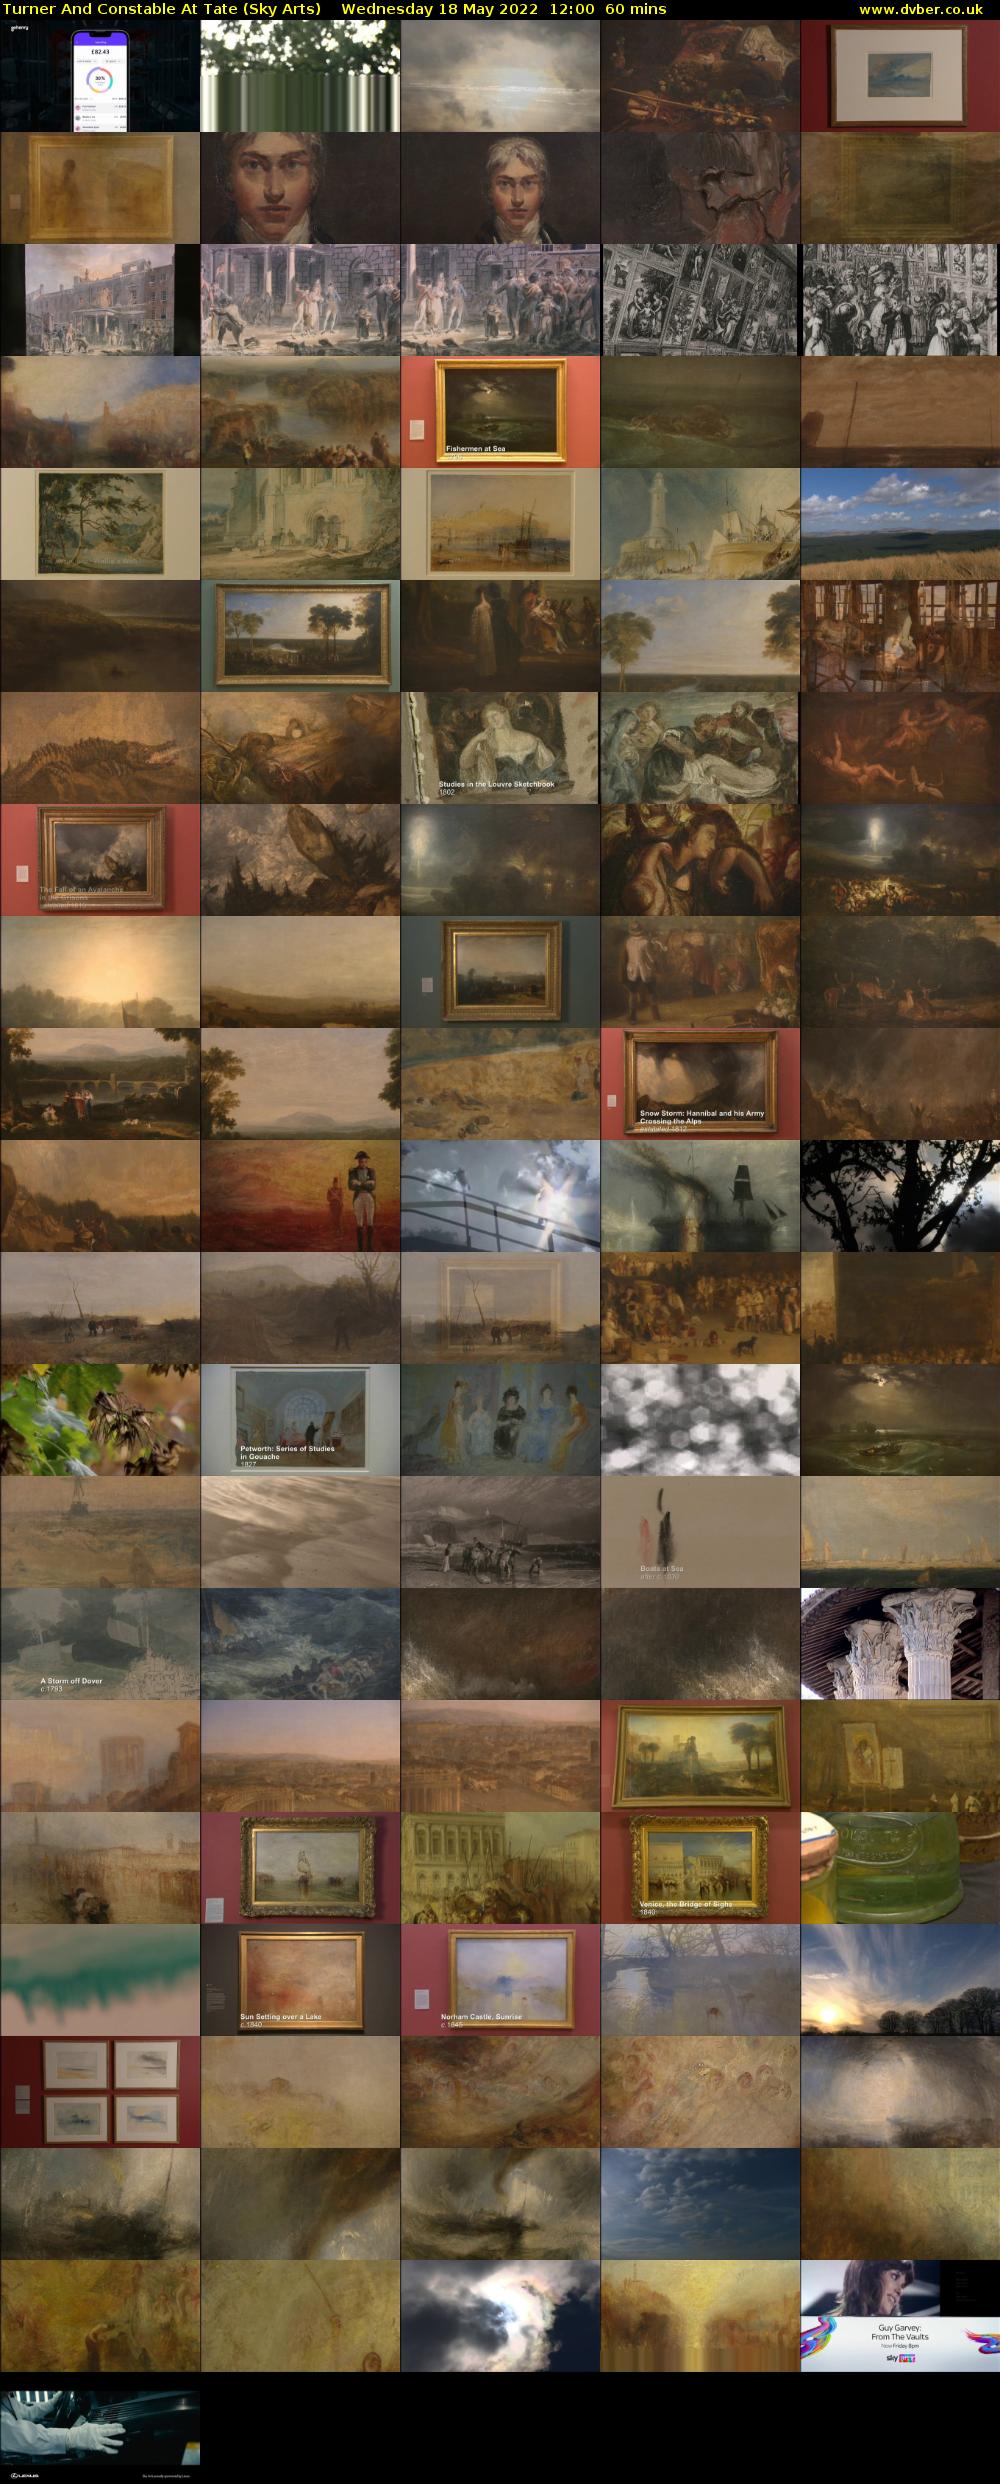 Turner And Constable At Tate (Sky Arts) Wednesday 18 May 2022 12:00 - 13:00